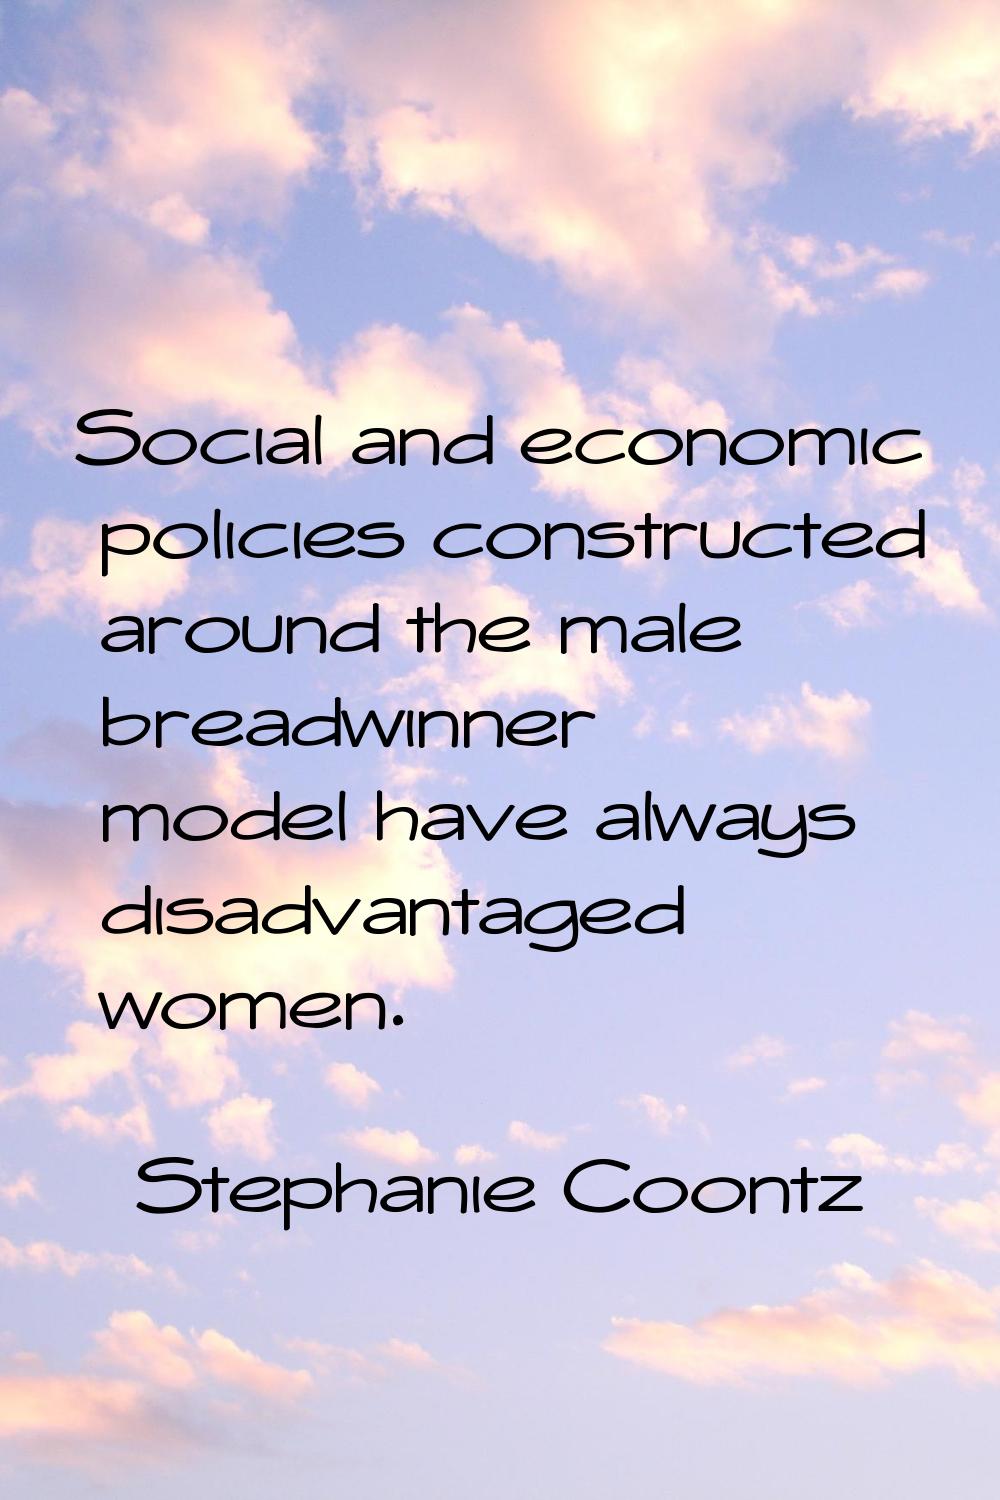 Social and economic policies constructed around the male breadwinner model have always disadvantage